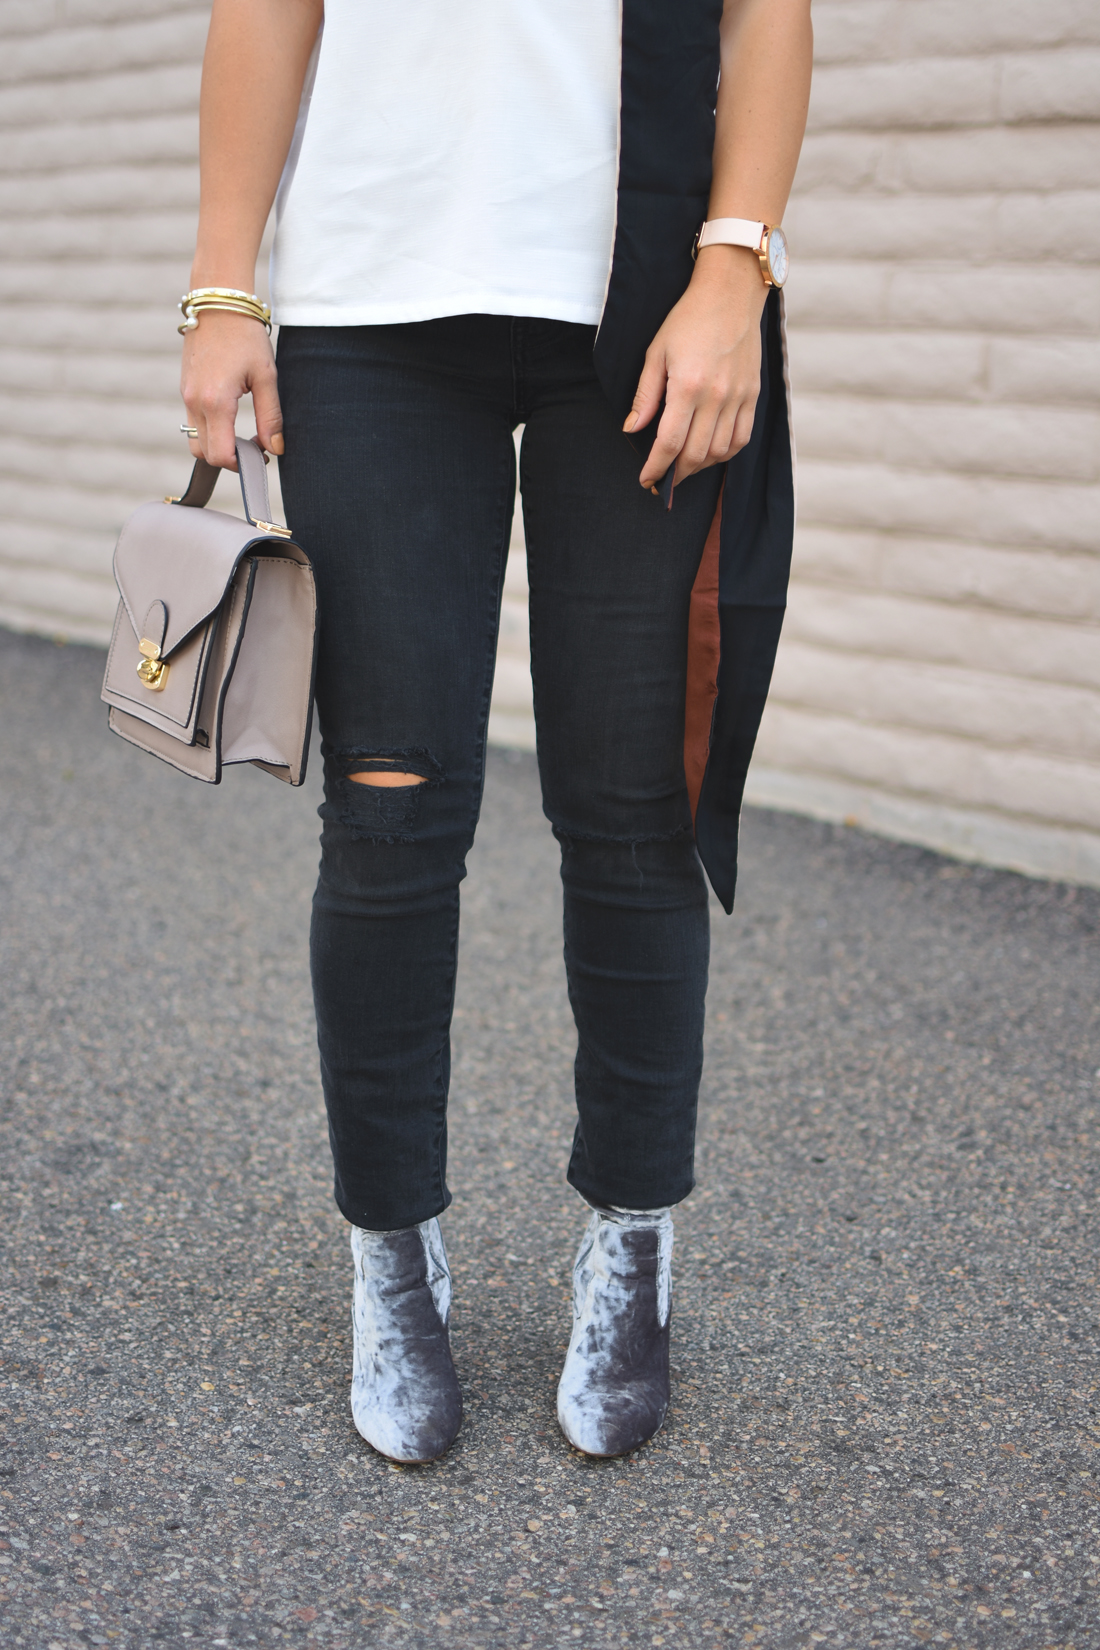 Carolina Hellal of Chic Talk wearing a Tobi white top, Madewell ripped jeans, Public Desire velvet boots and H&M scarf